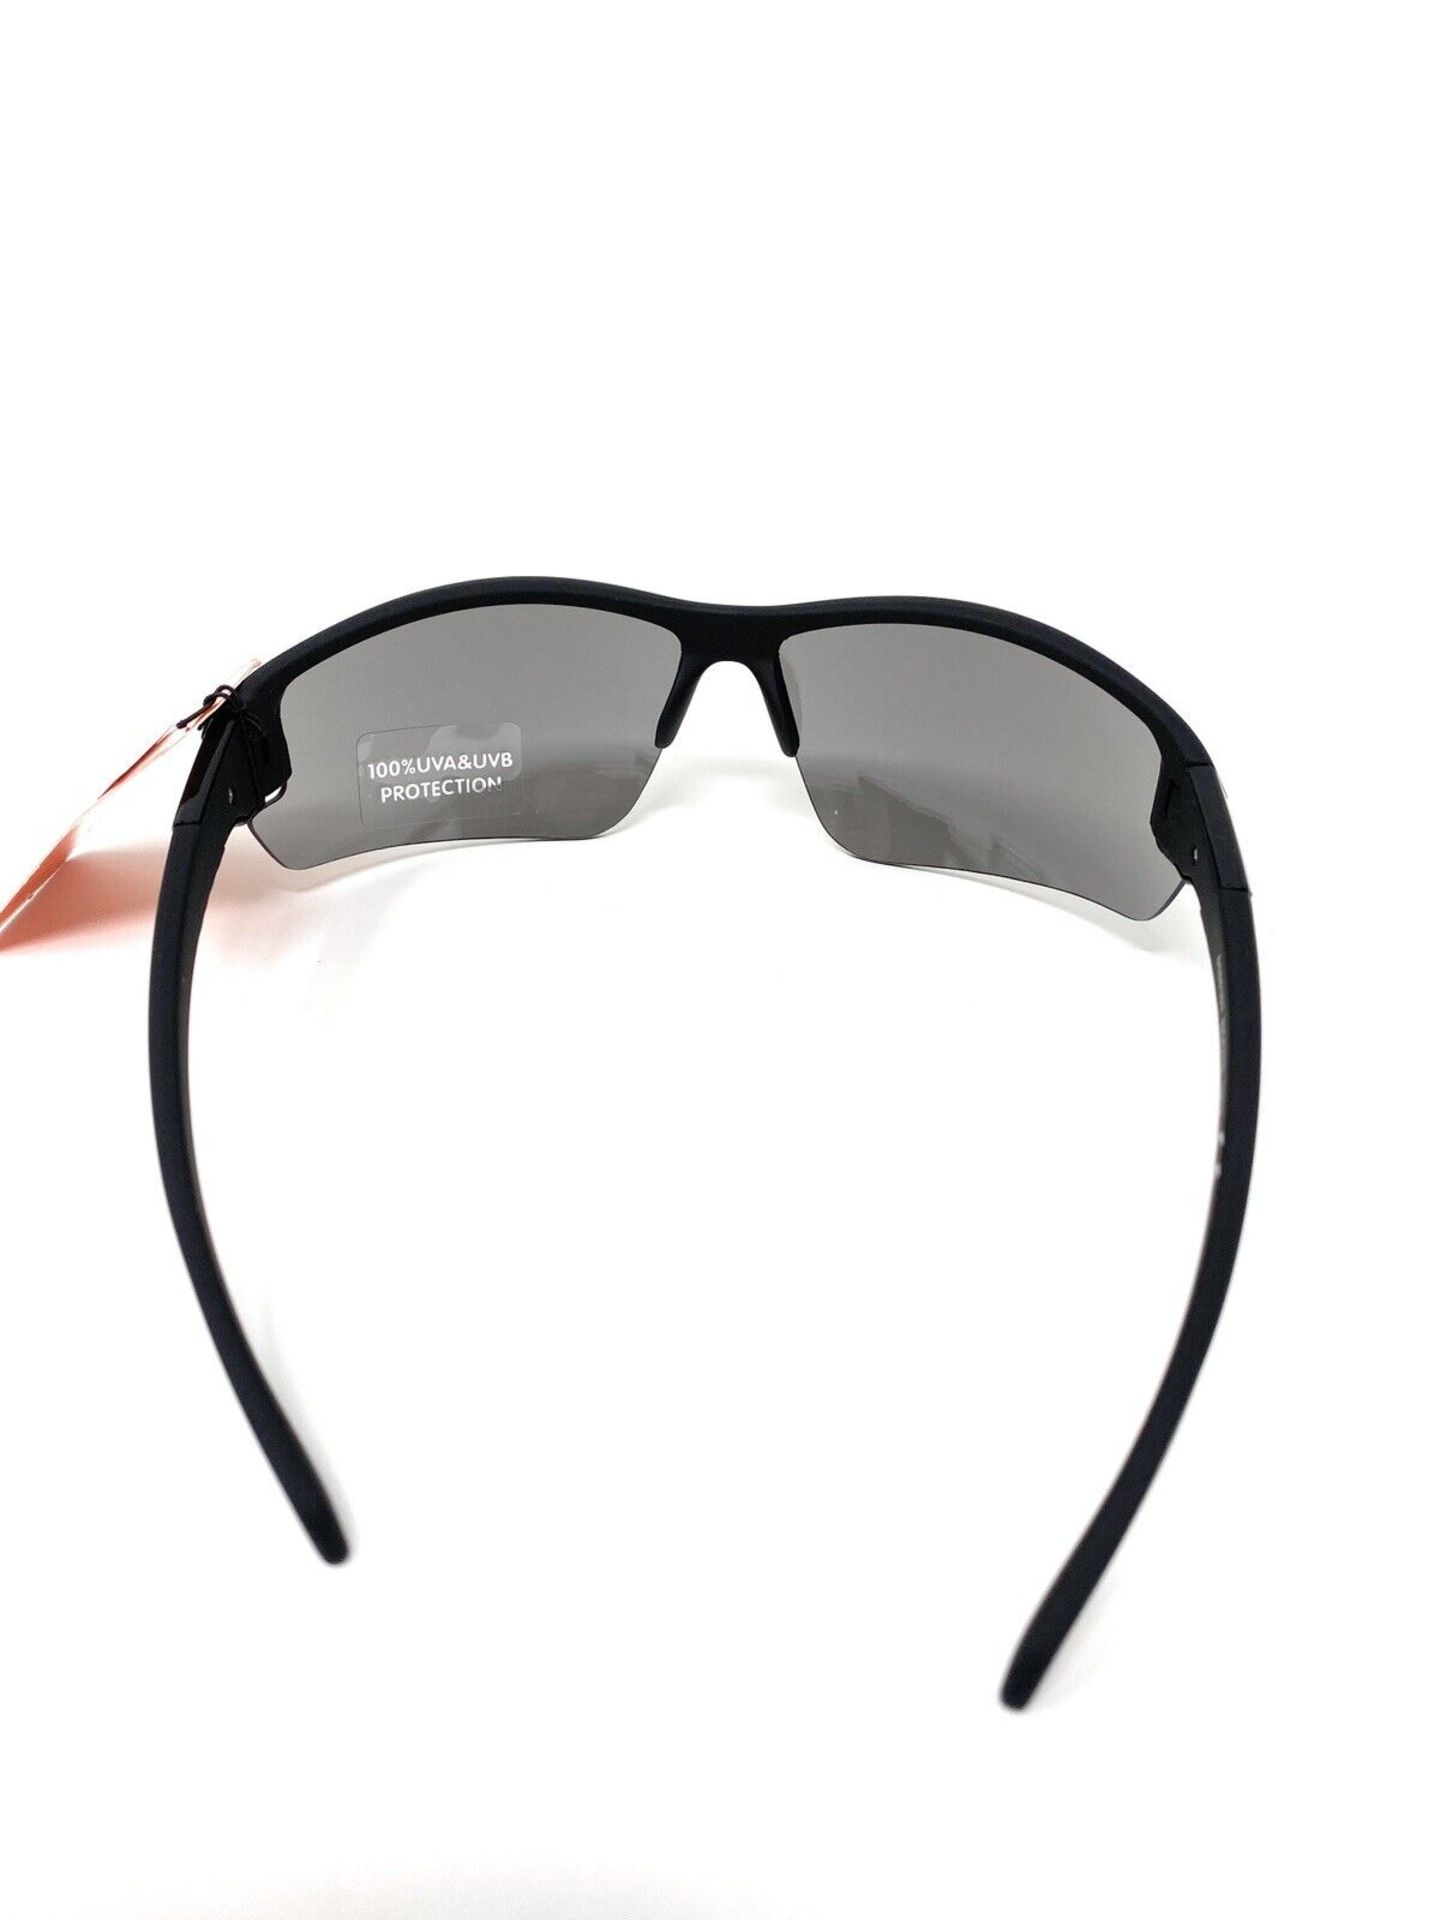 40 x Boots Active Sports Styled Sunglasses 100% UVA - (NEW) - BOOTS RRP £1,000 ! - Image 5 of 5